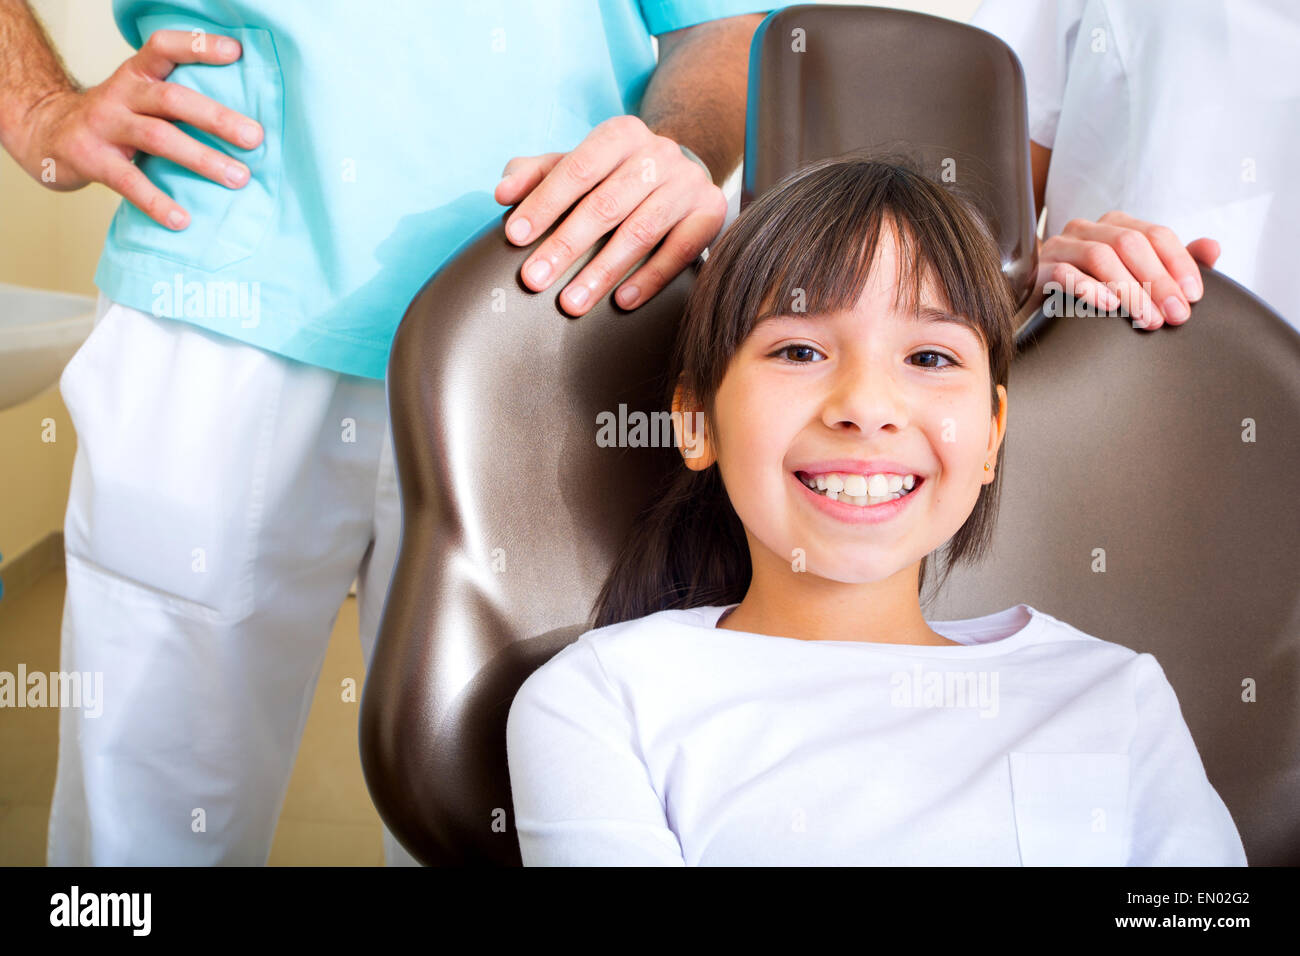 A little girl at the dentist during treatment. Stock Photo